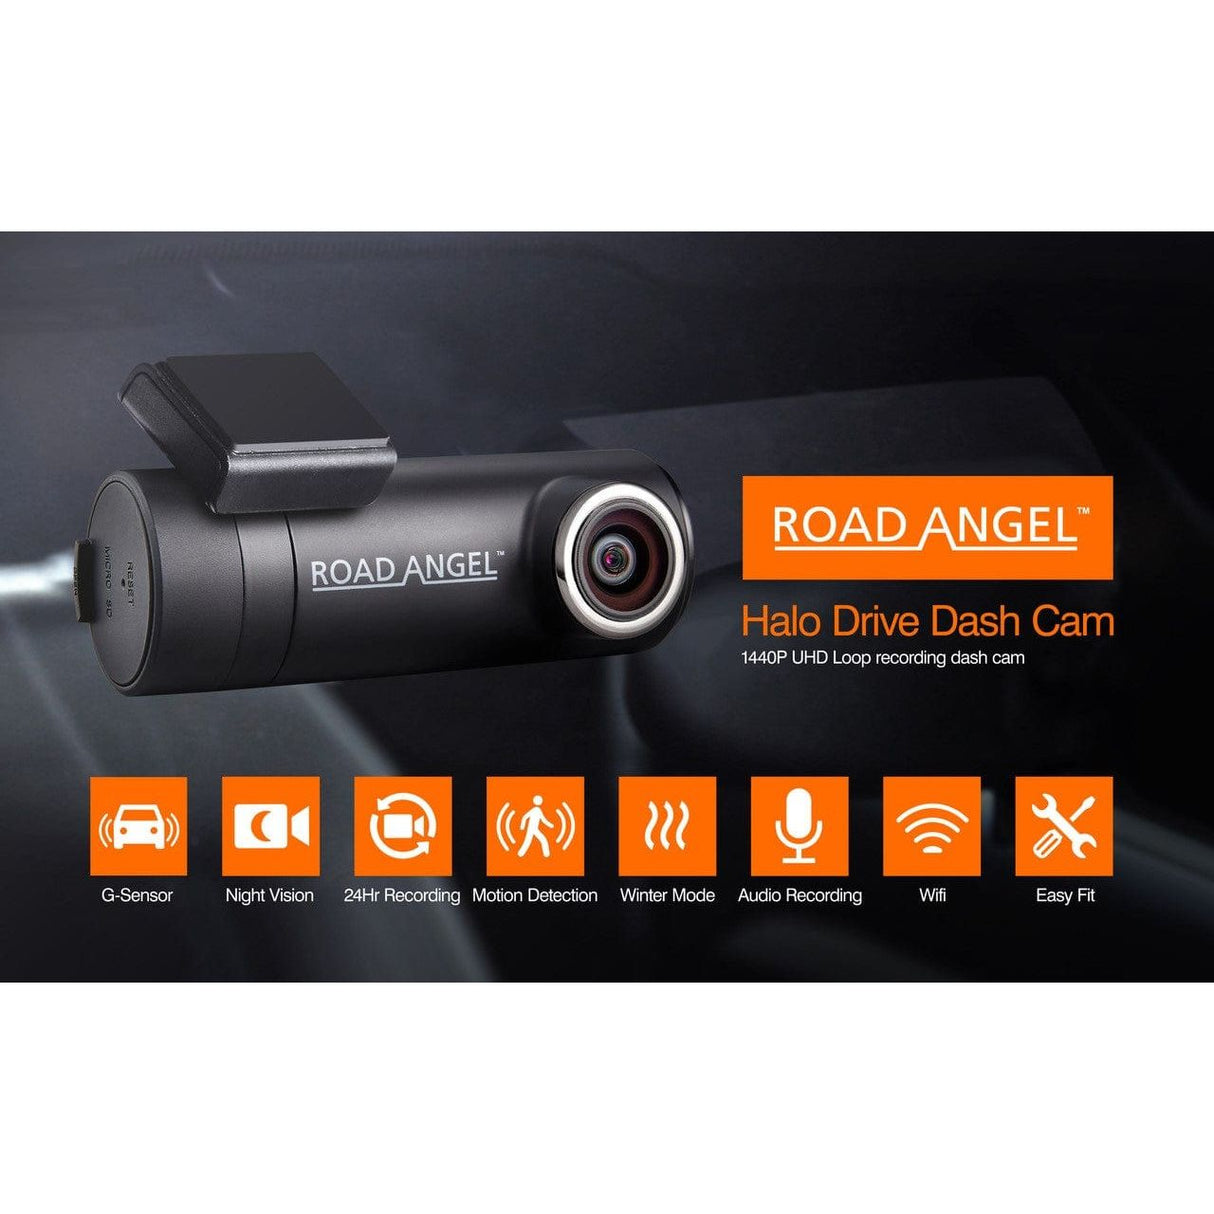 Road Angel Road Safety Halo Drive Dash Cam, 2K 1440p 140° Camera, with Super Night View, Built-In Wi-Fi, Winter Mode